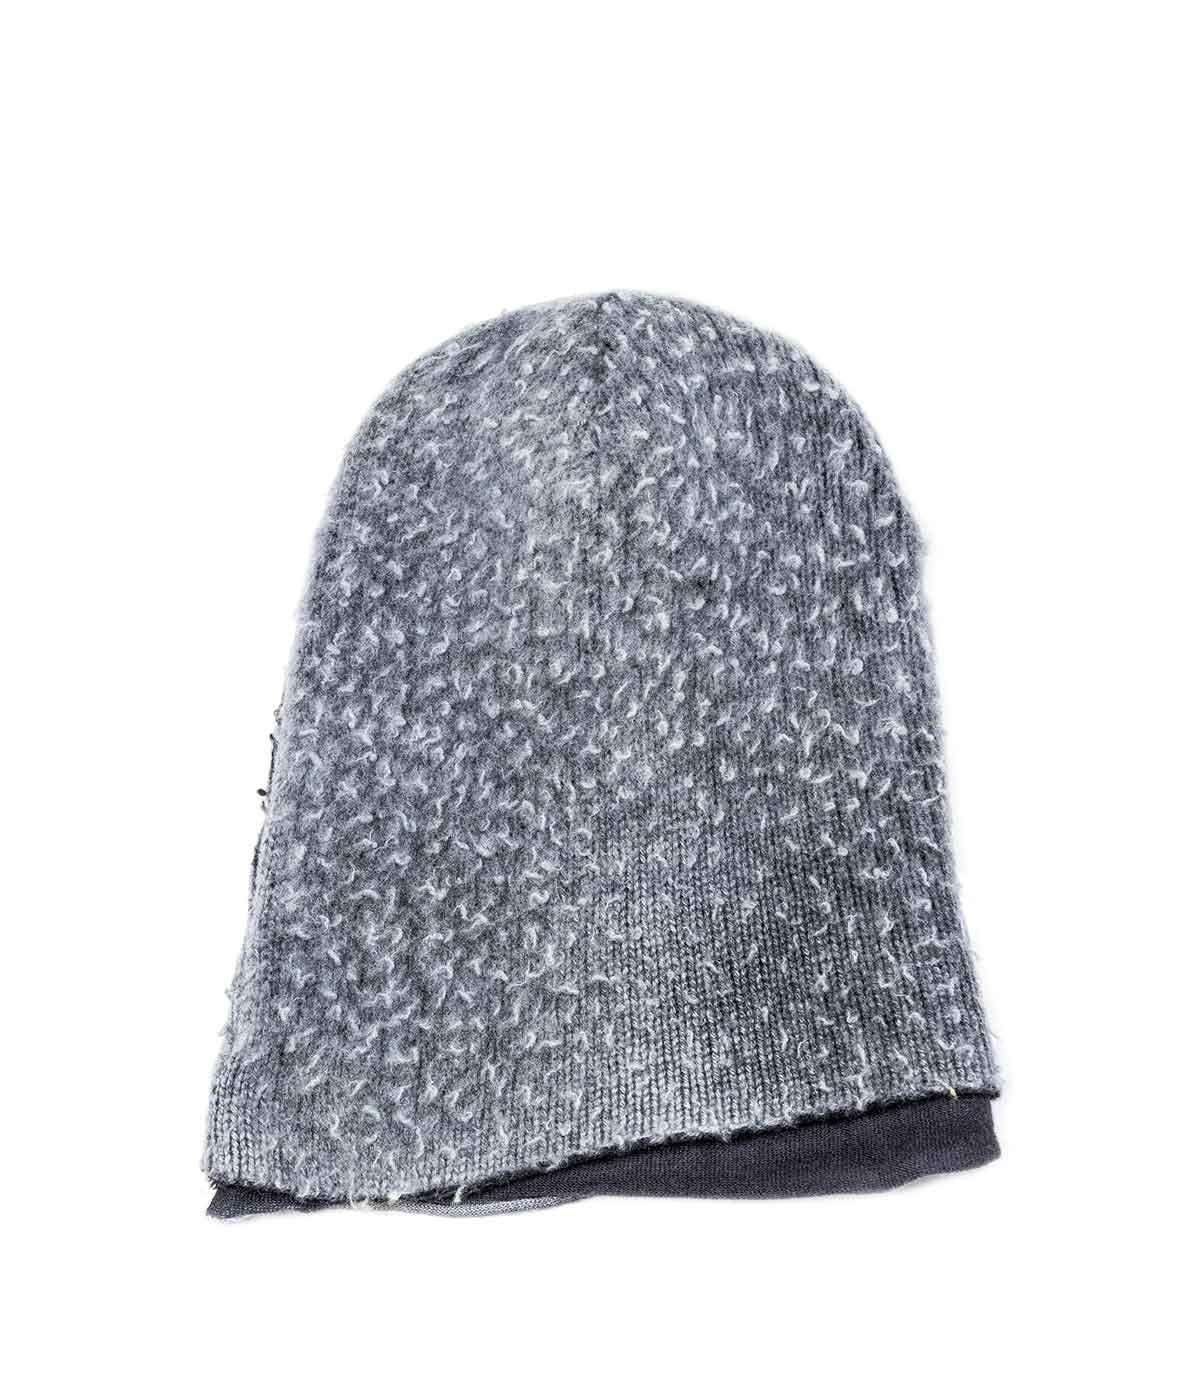 Double-Layered Textured Grey Toque